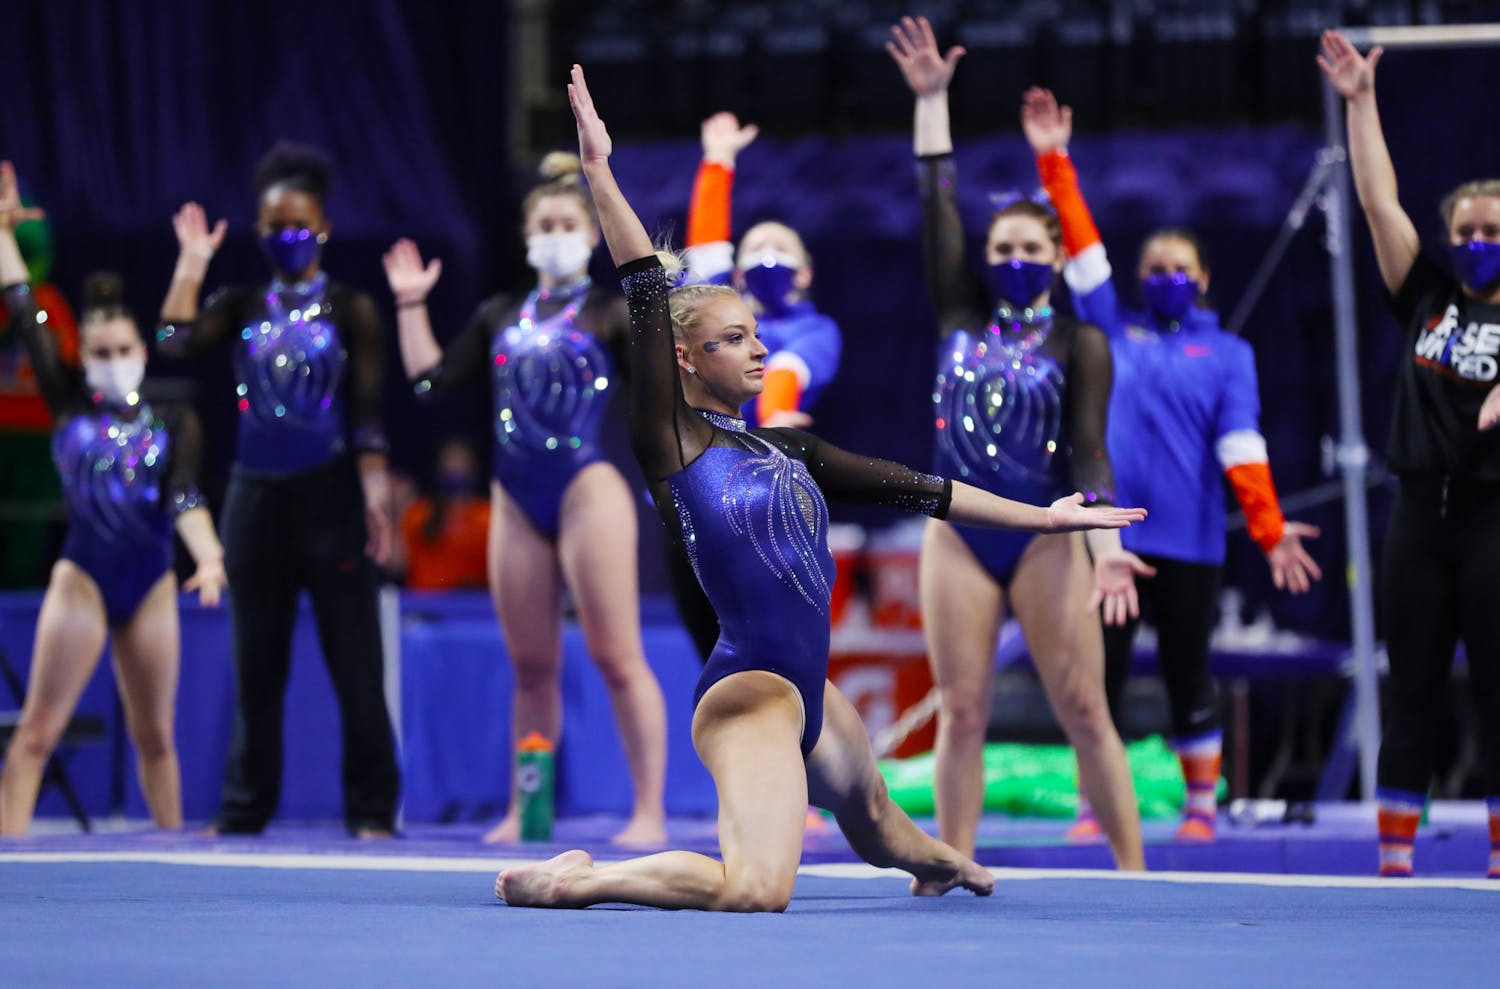 Florida gymnast Alyssa Baumann during the Gators&#x27; meet against the Georgia Bulldogs on Friday, January 15, 2021 at Exactech Arena at the Stephen C. O&#x27;Connell Center in Gainesville, FL / UAA Communications photo by Hannah White